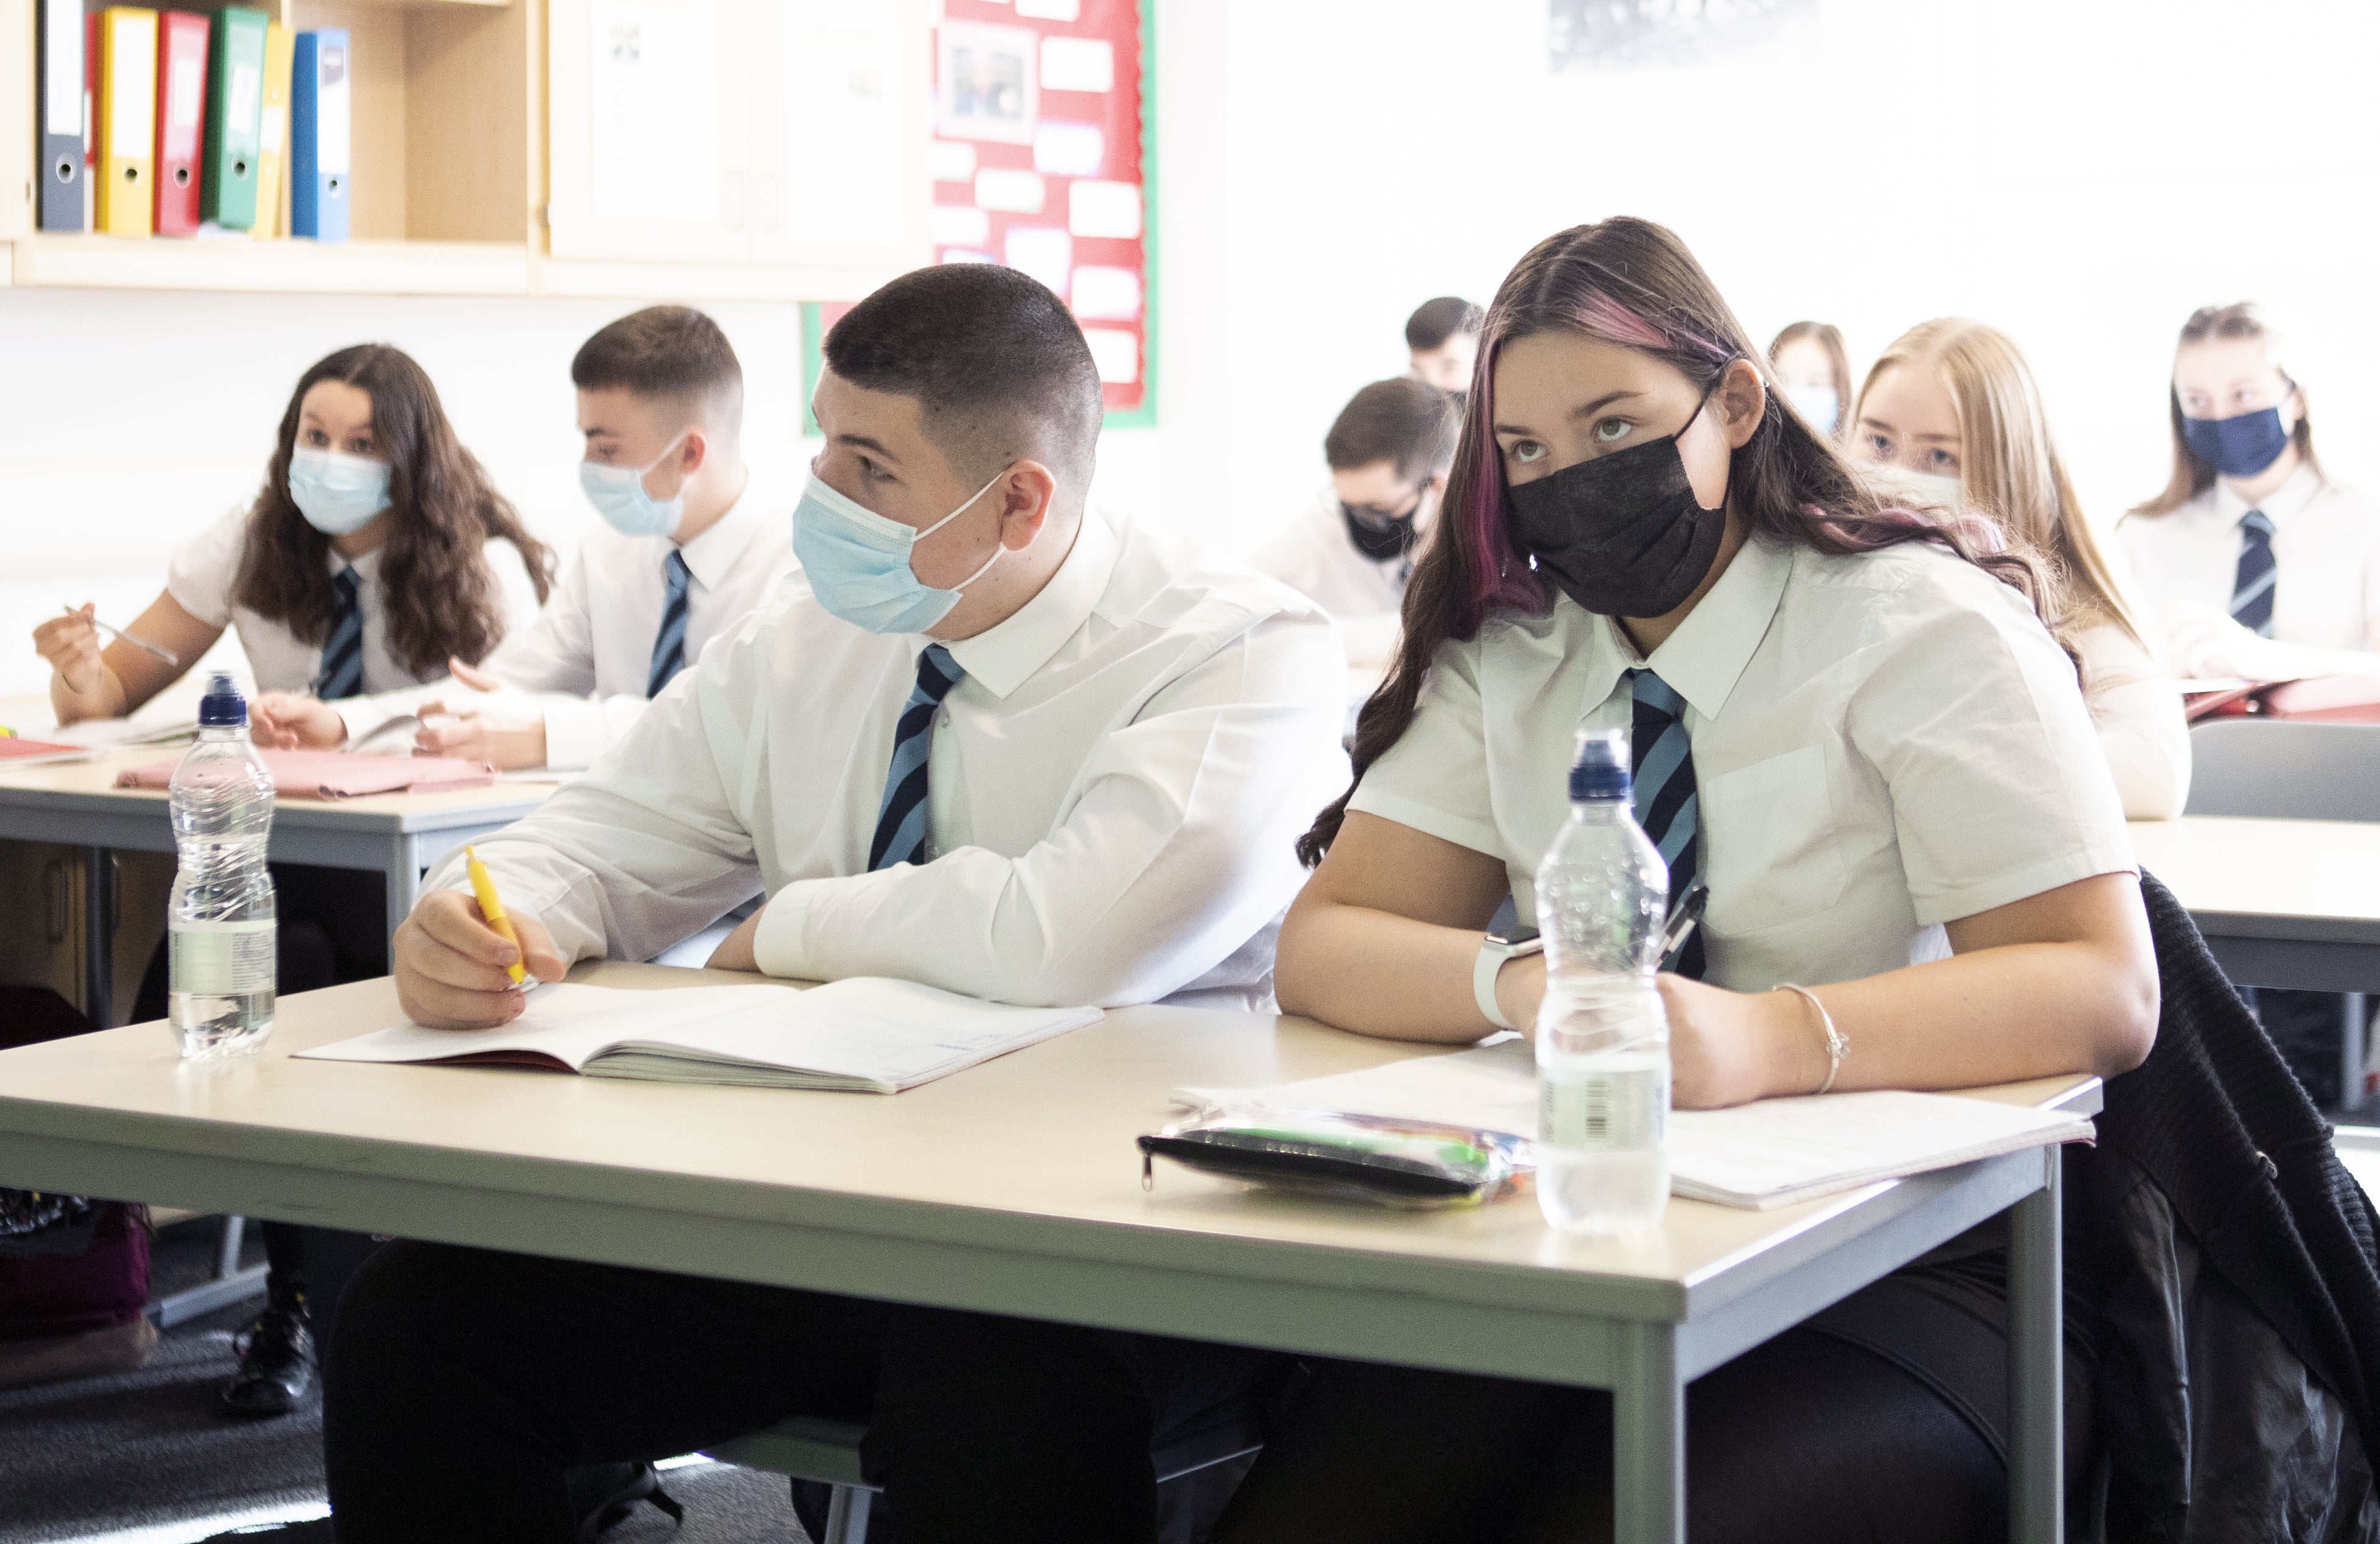 Students were face masks in a classroom in England